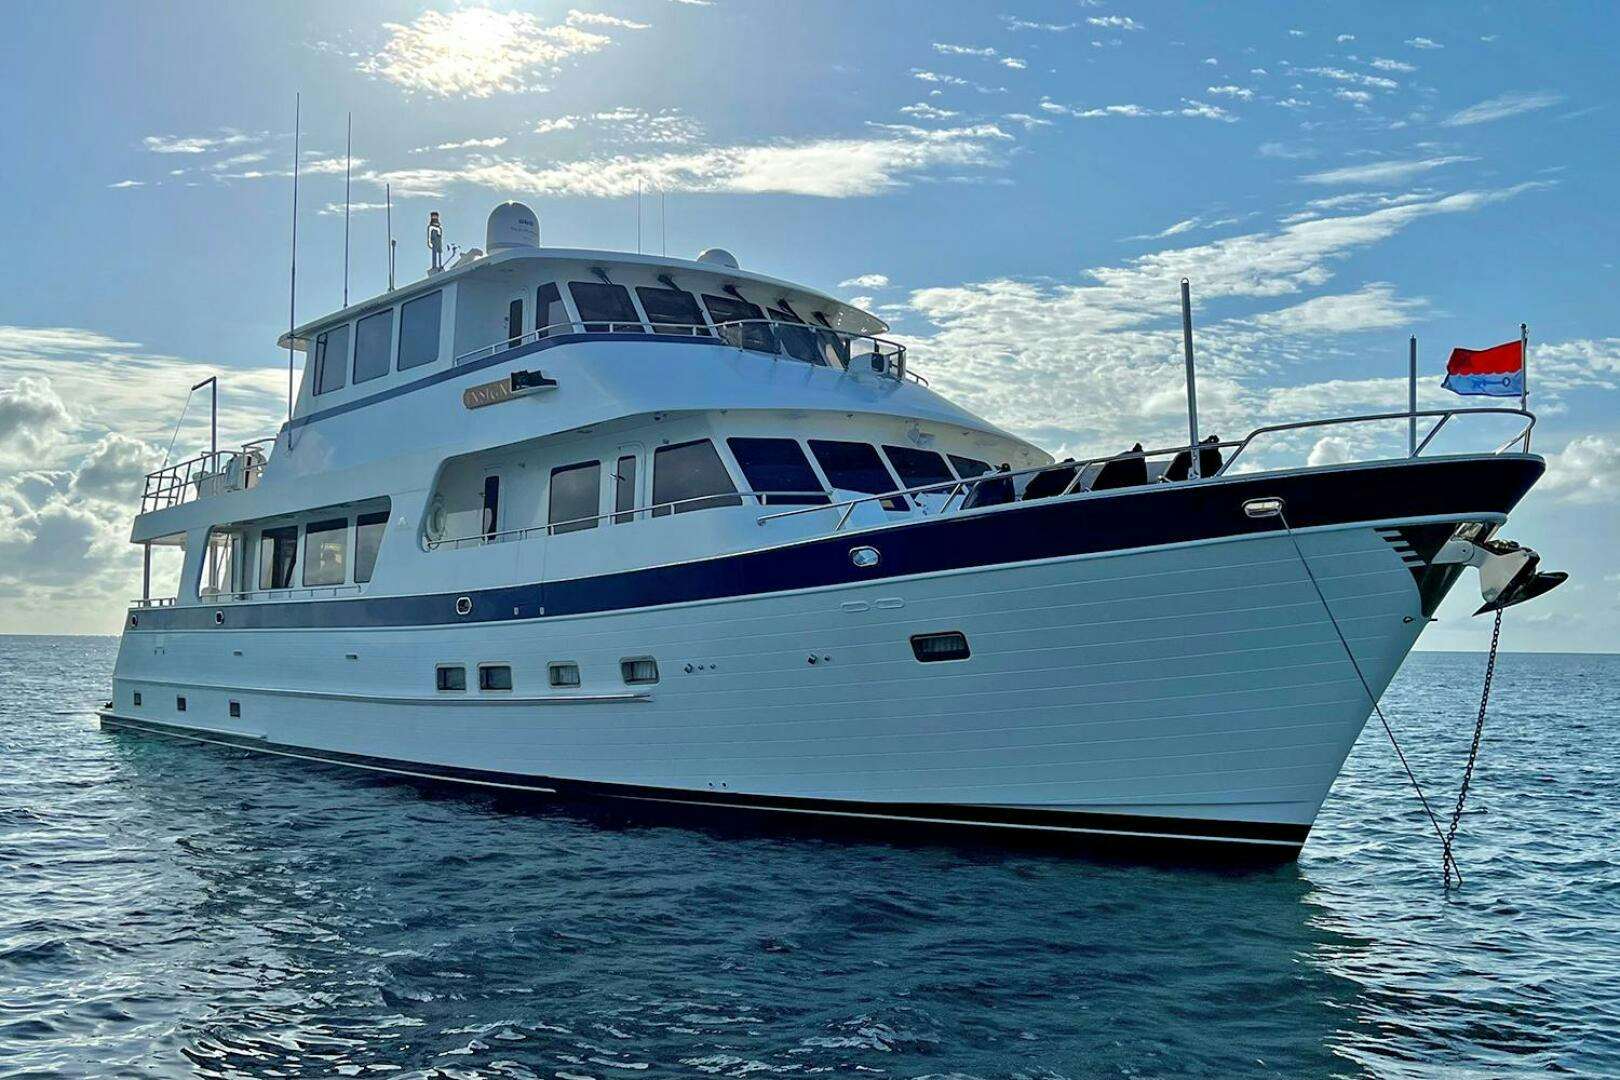 Insignia
Yacht for Sale